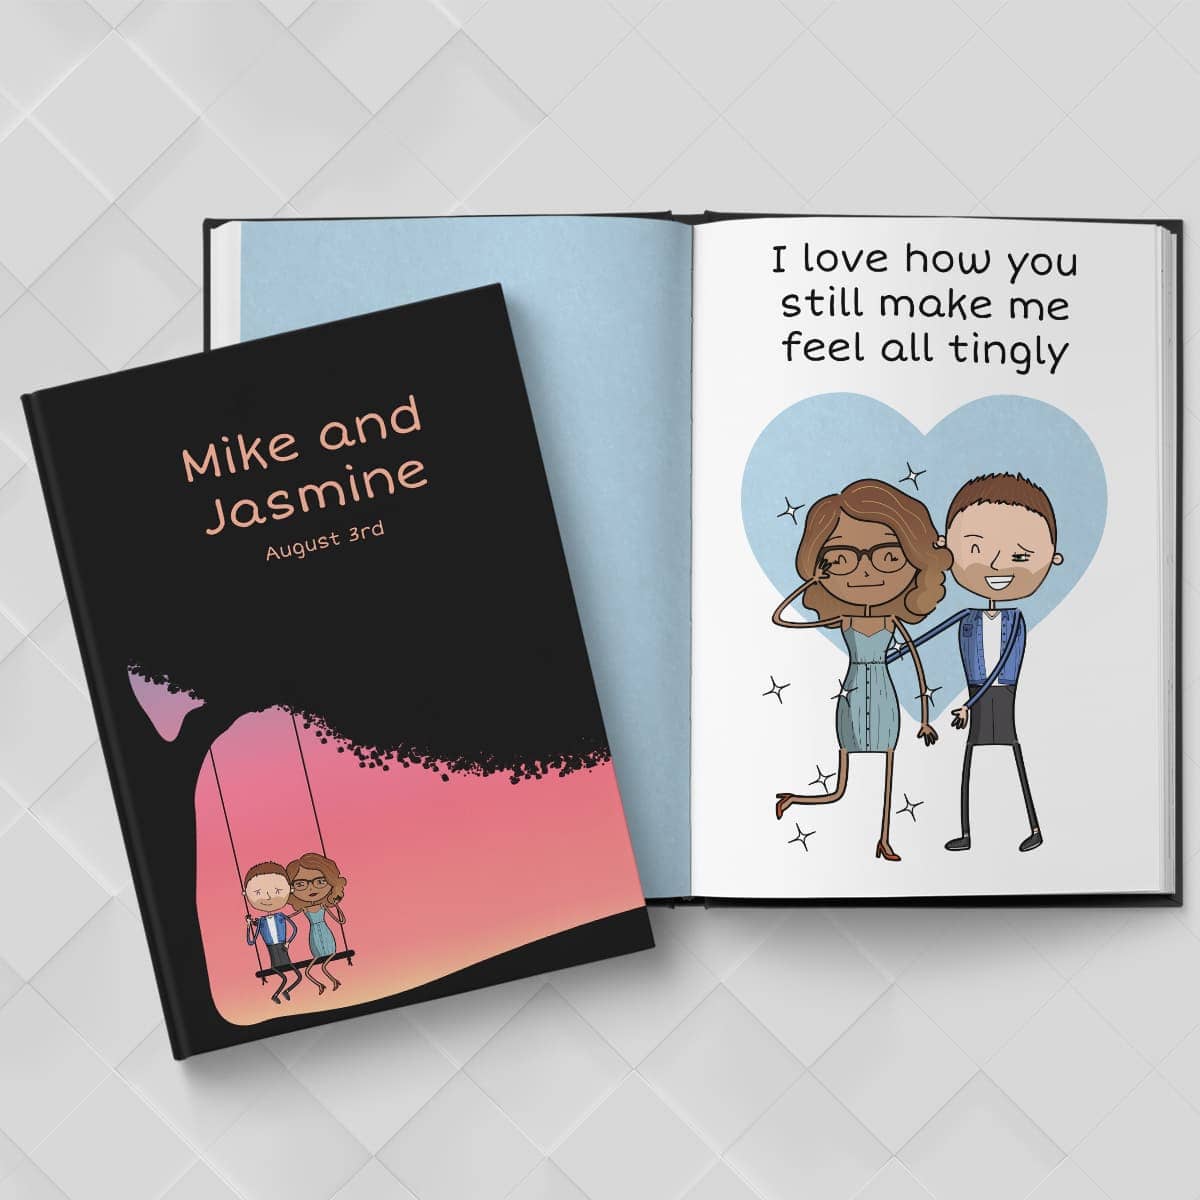 Wedding Gifts by LoveBook | The Personalized Gift Book That Says Why You Love Someone | LoveBook Online - 0